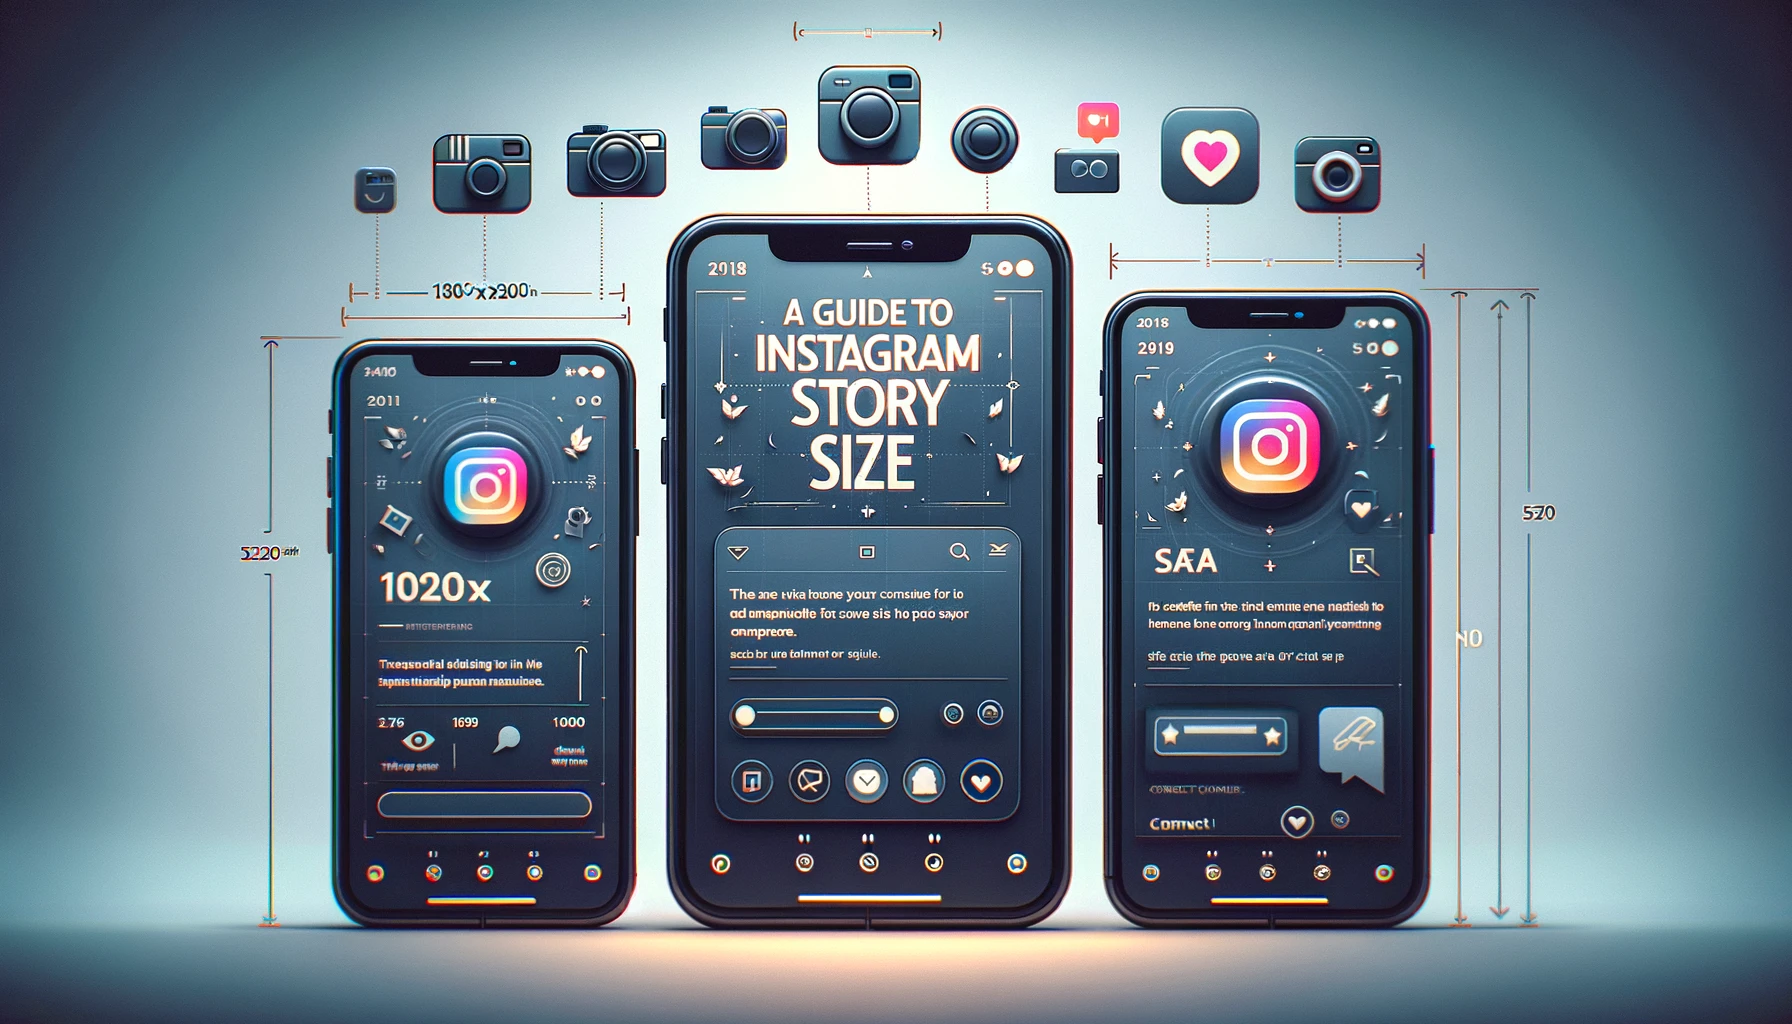 Instagram Story Size A Beginner’s Guide to Instagram Story Dimensions